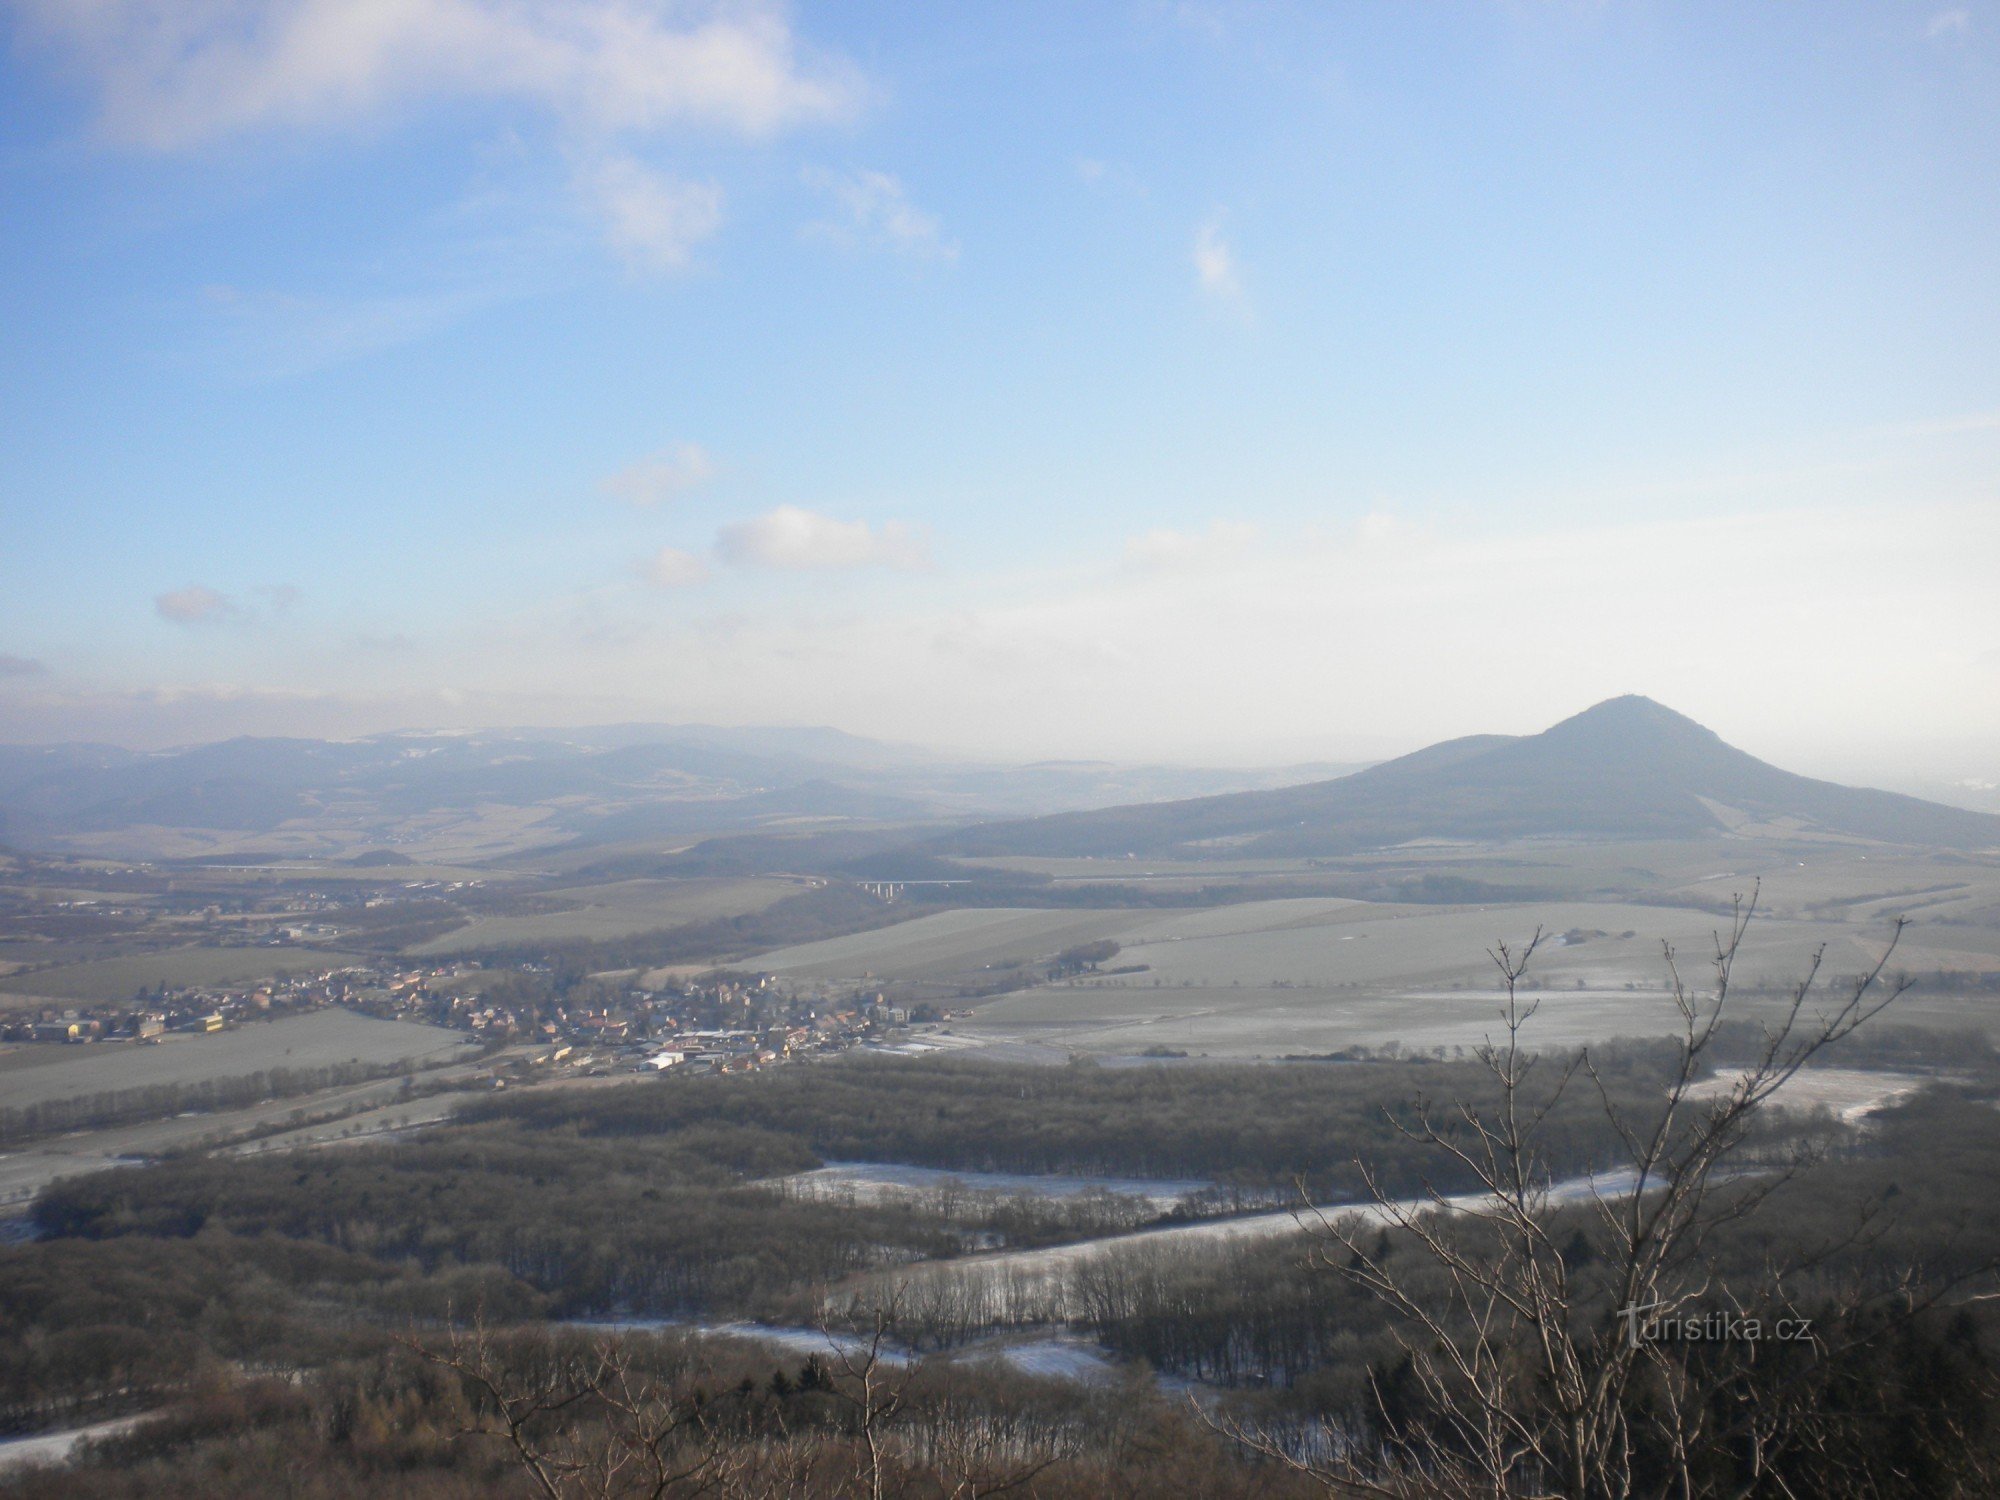 View of the region from Ostrý Castle towards the east. Lovoš hill in the foreground.